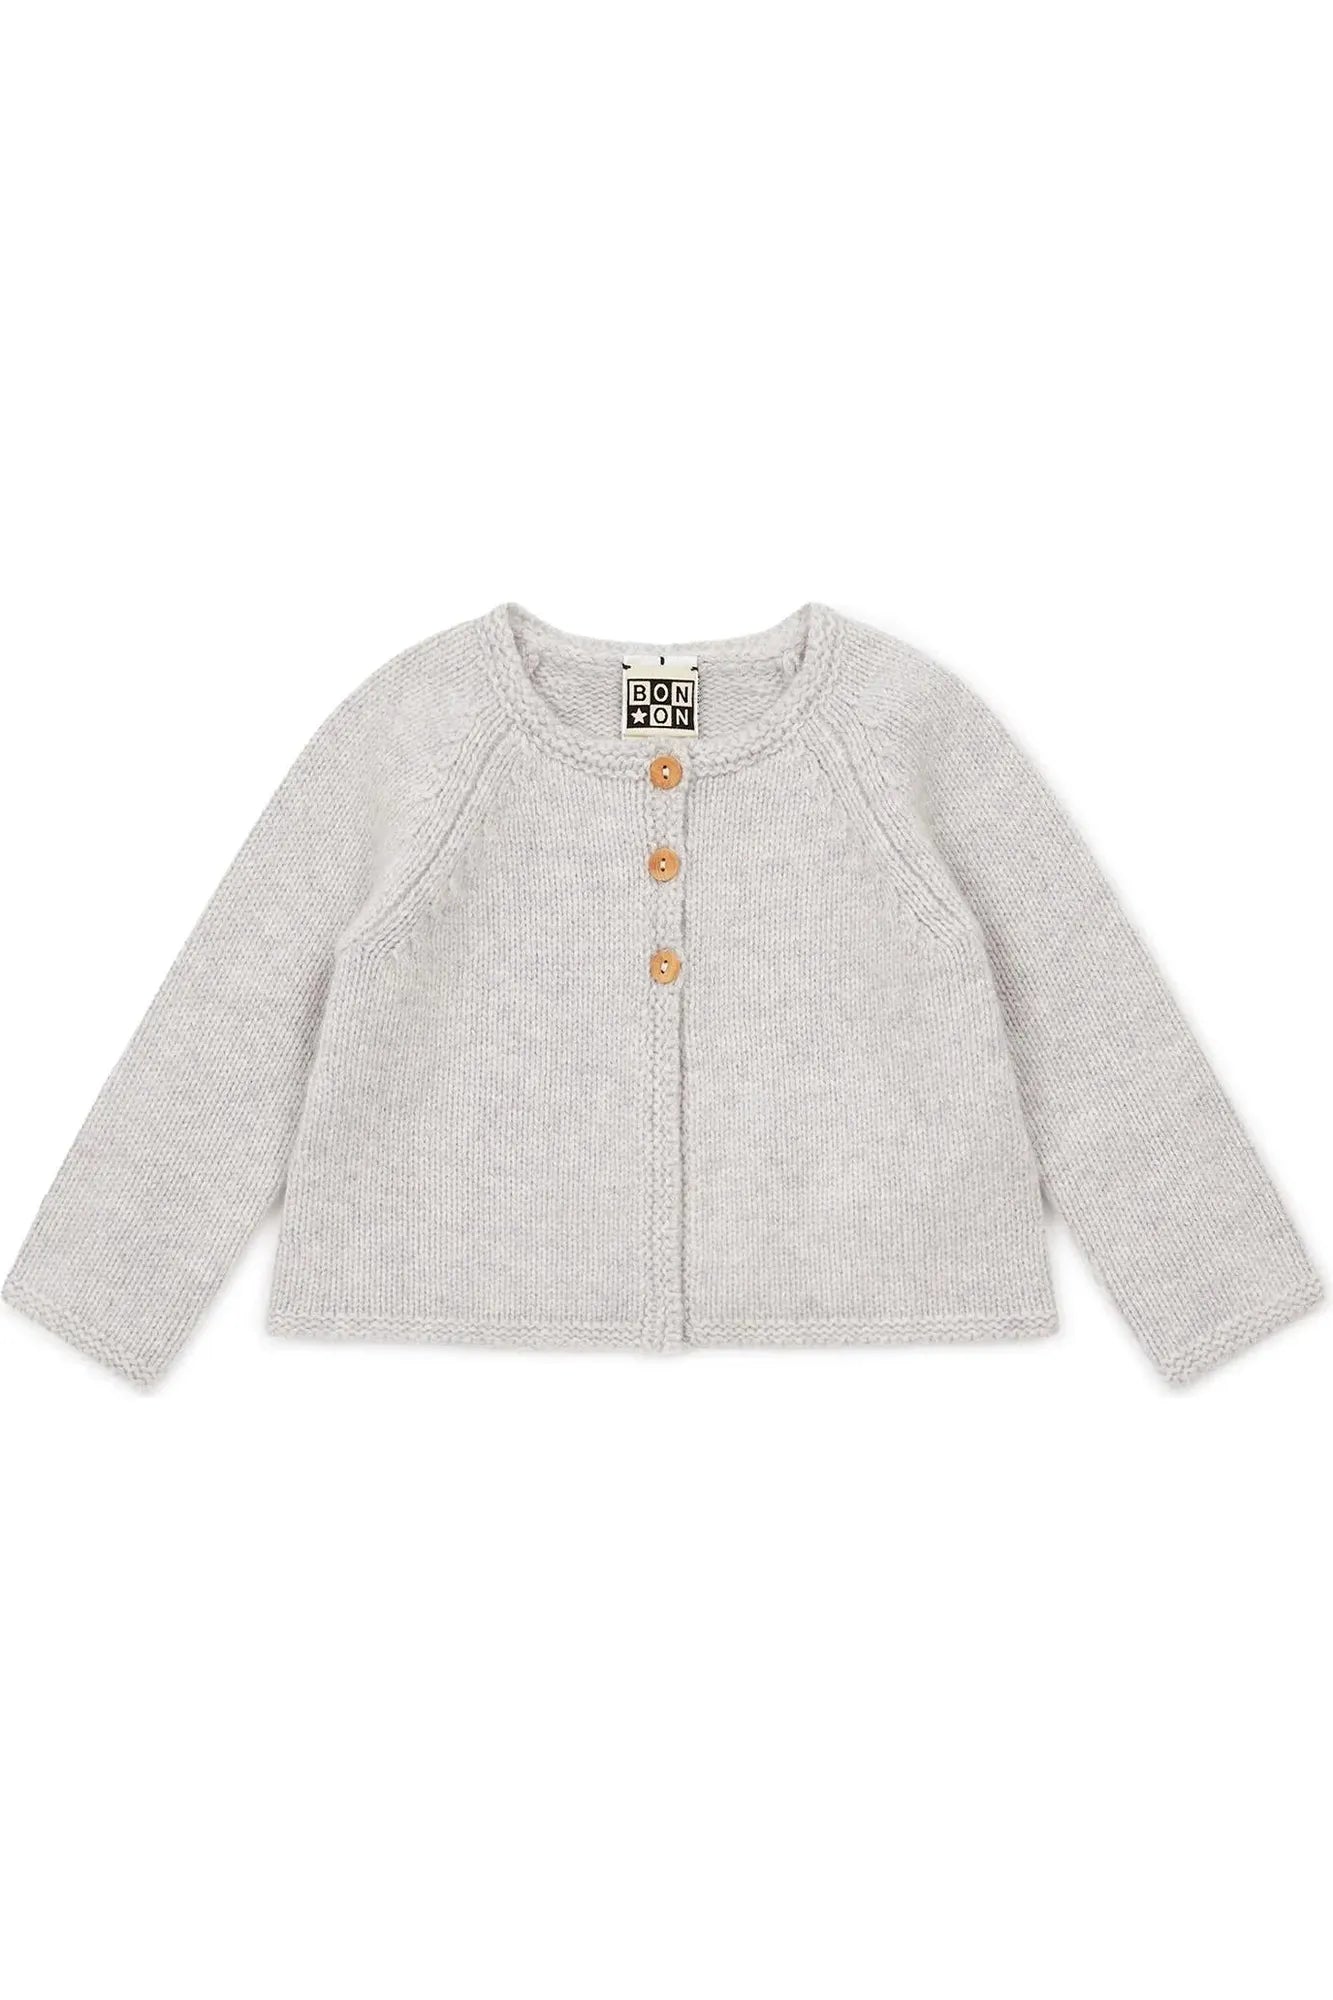 Baby Knitted Cardigan - Heather Grey